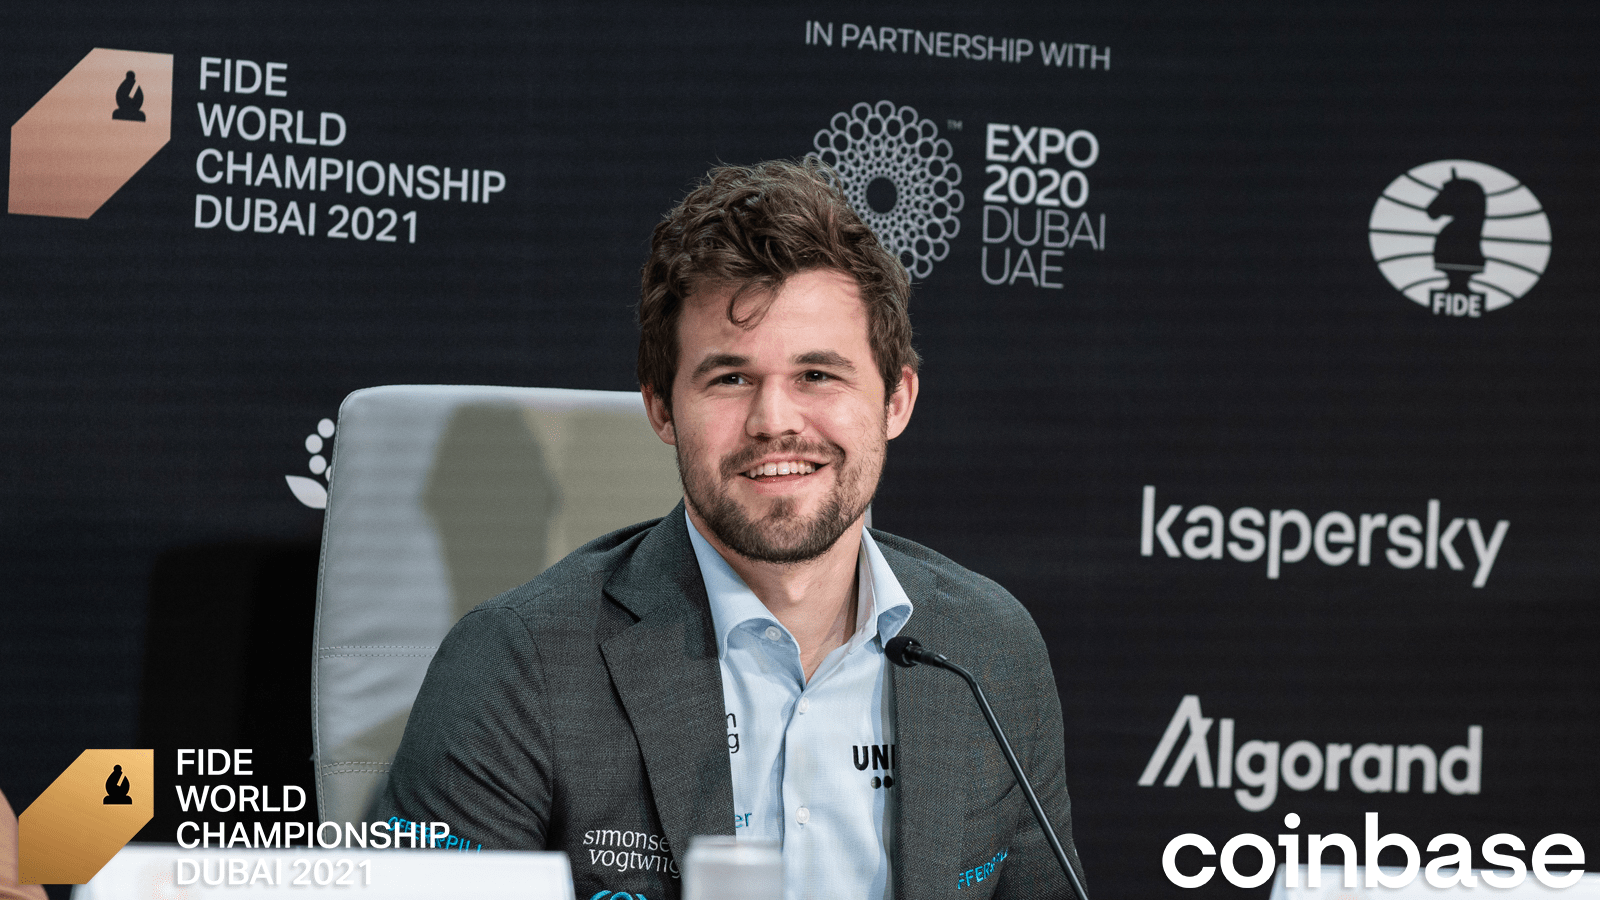 Another tight draw as Carlsen and Nepomniachtchi battle for world title, World Chess Championship 2021